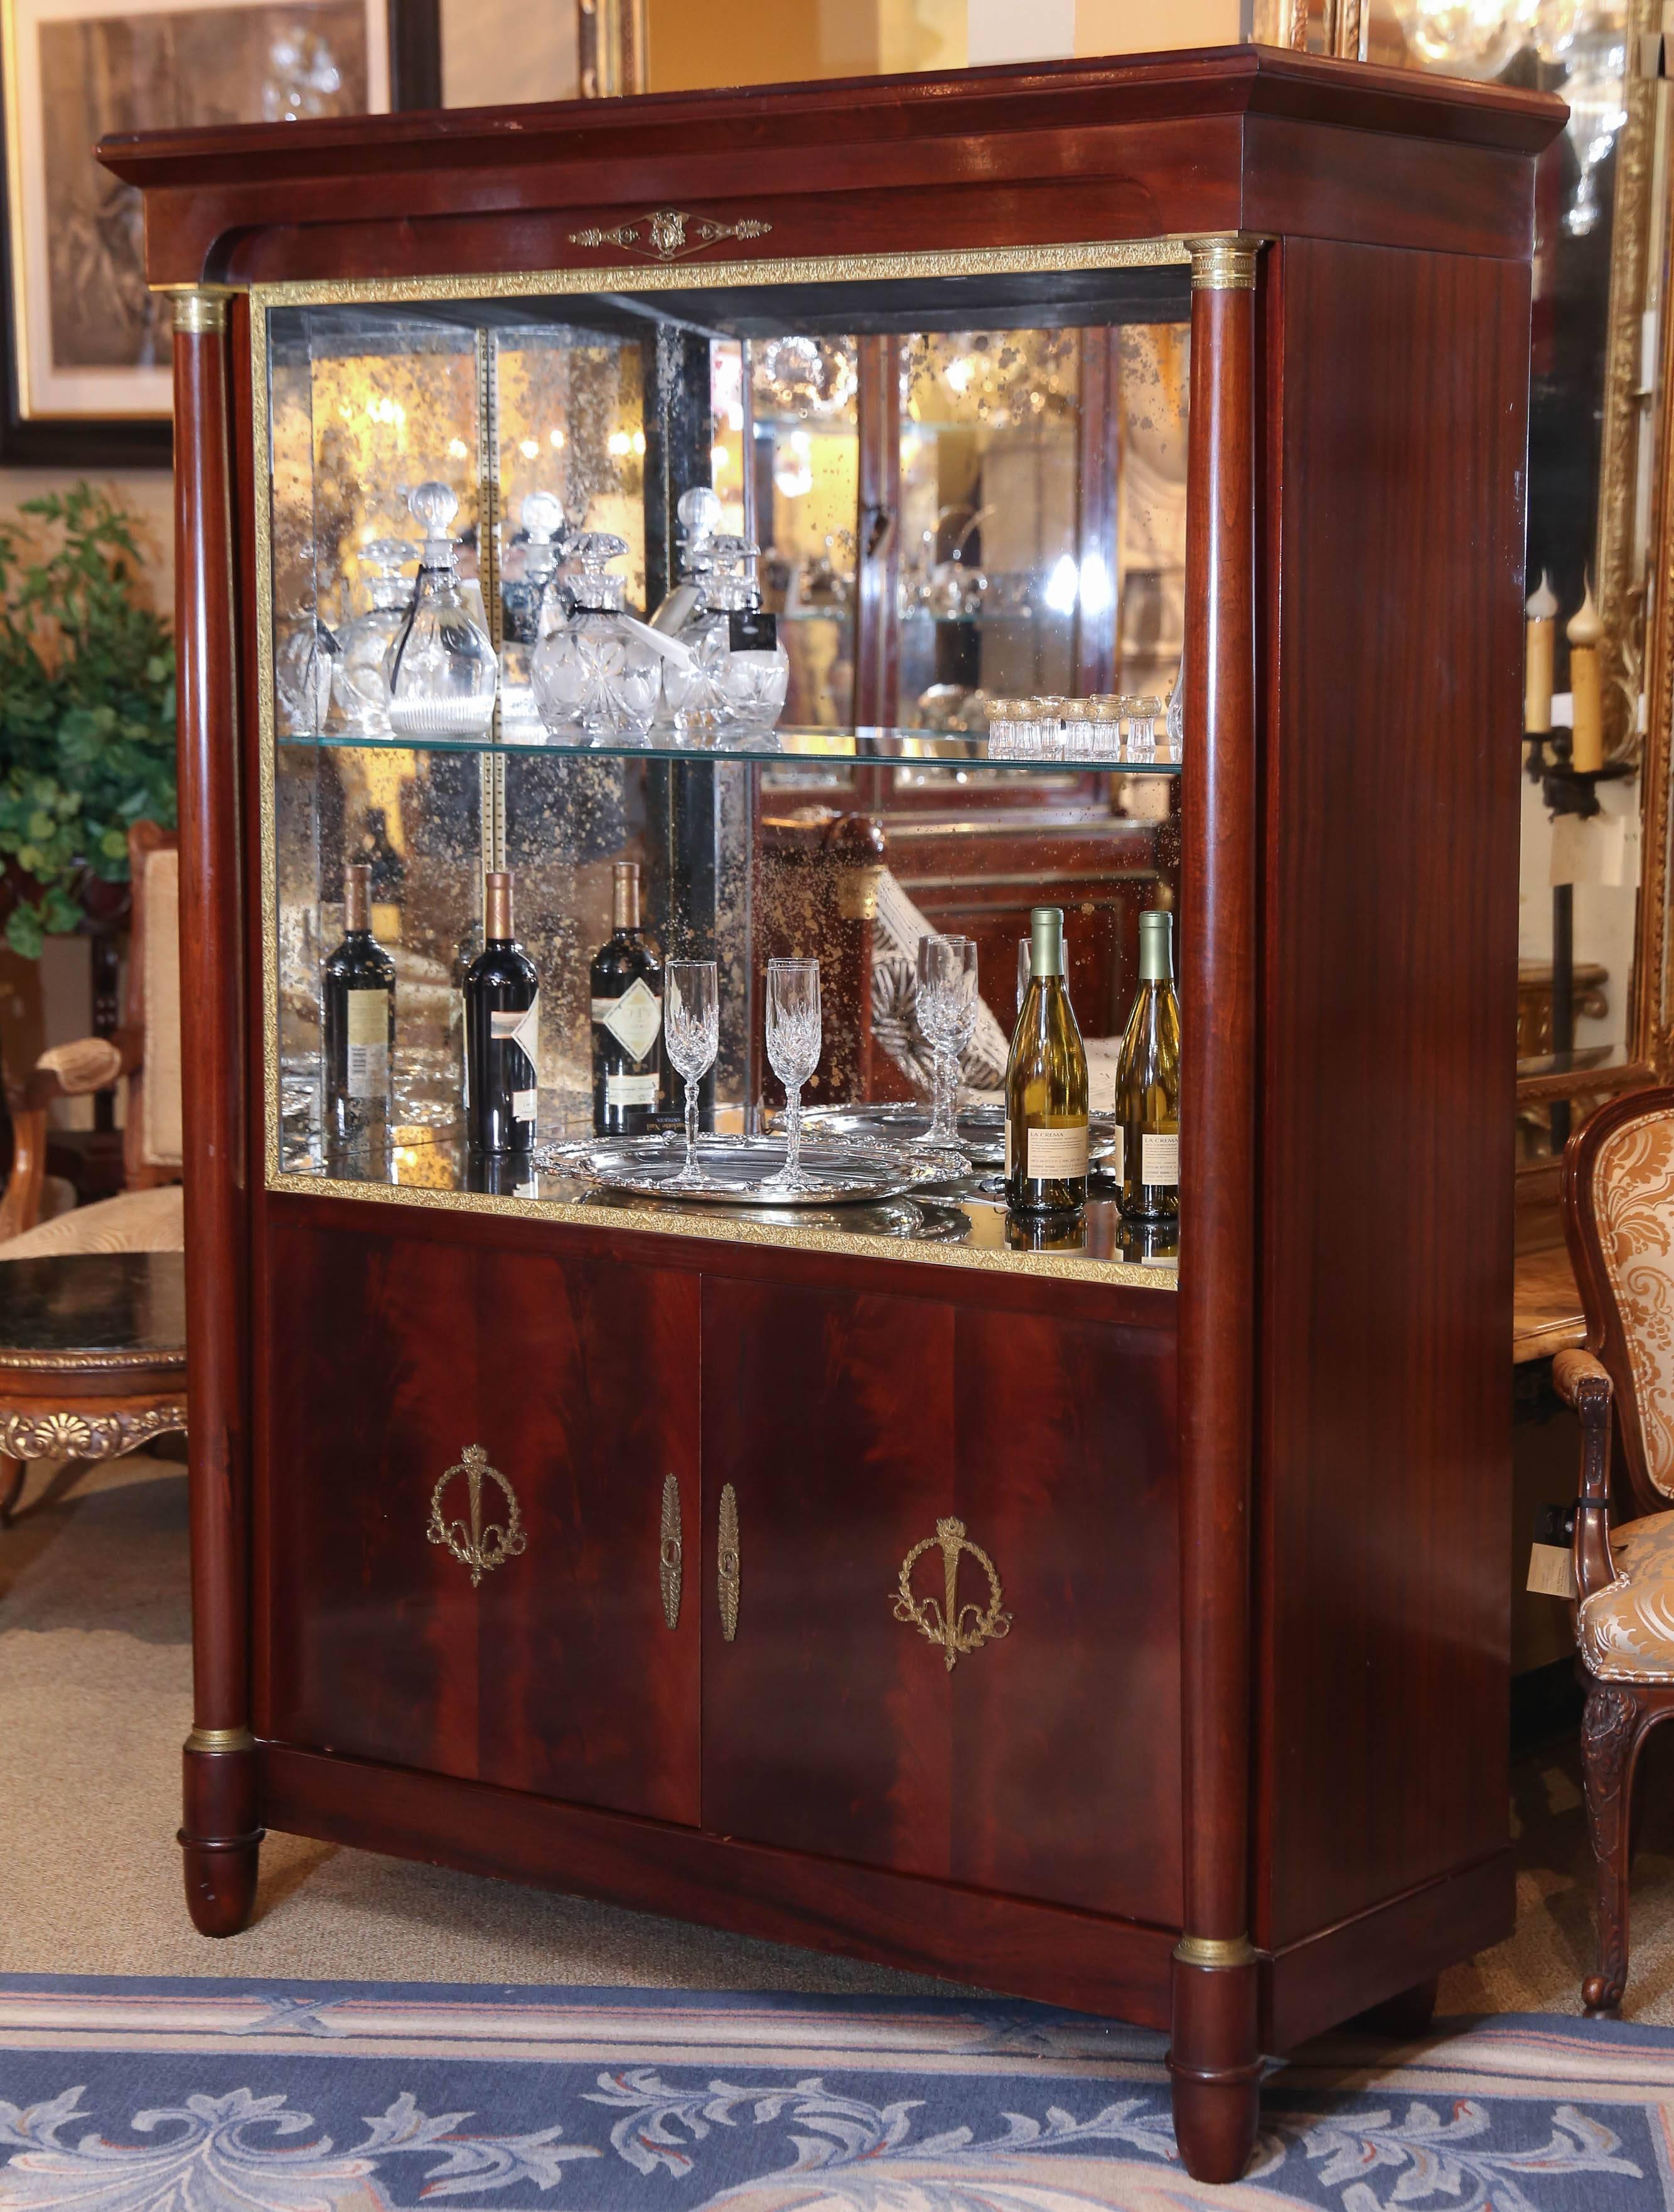 Impressive cabinet that can become a bar, bookcase or display
Made of mahogany and lined with antiqued glass with one
Moveable glass shelf. Bronze accents with a mask at the
Centre top and a wreath with a torch decorates the doors
of this